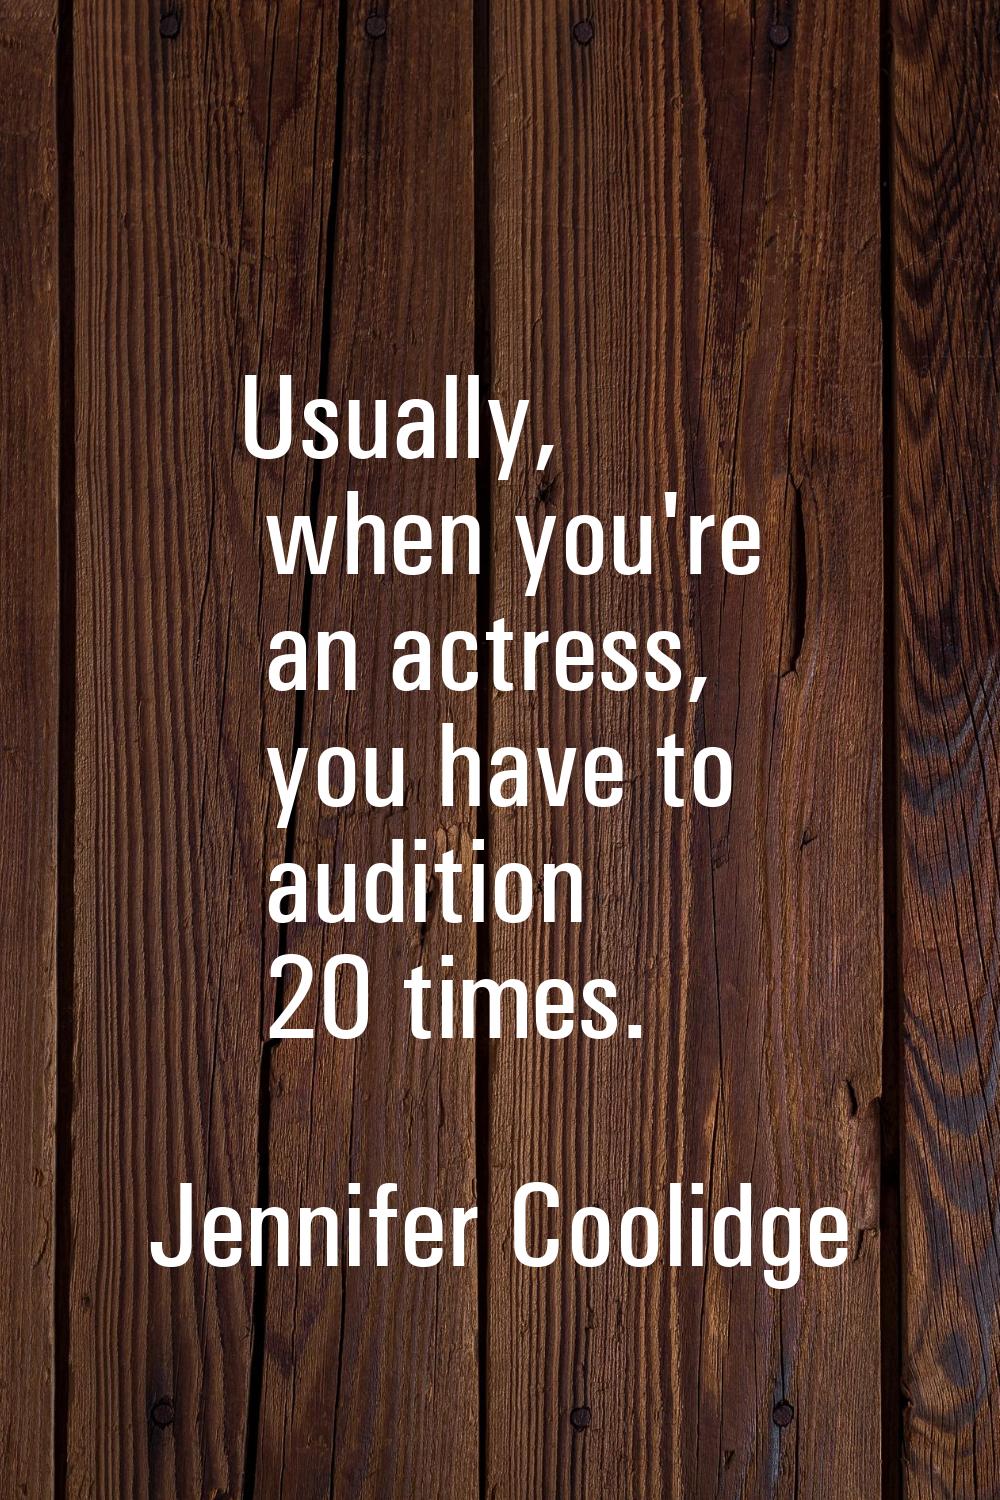 Usually, when you're an actress, you have to audition 20 times.